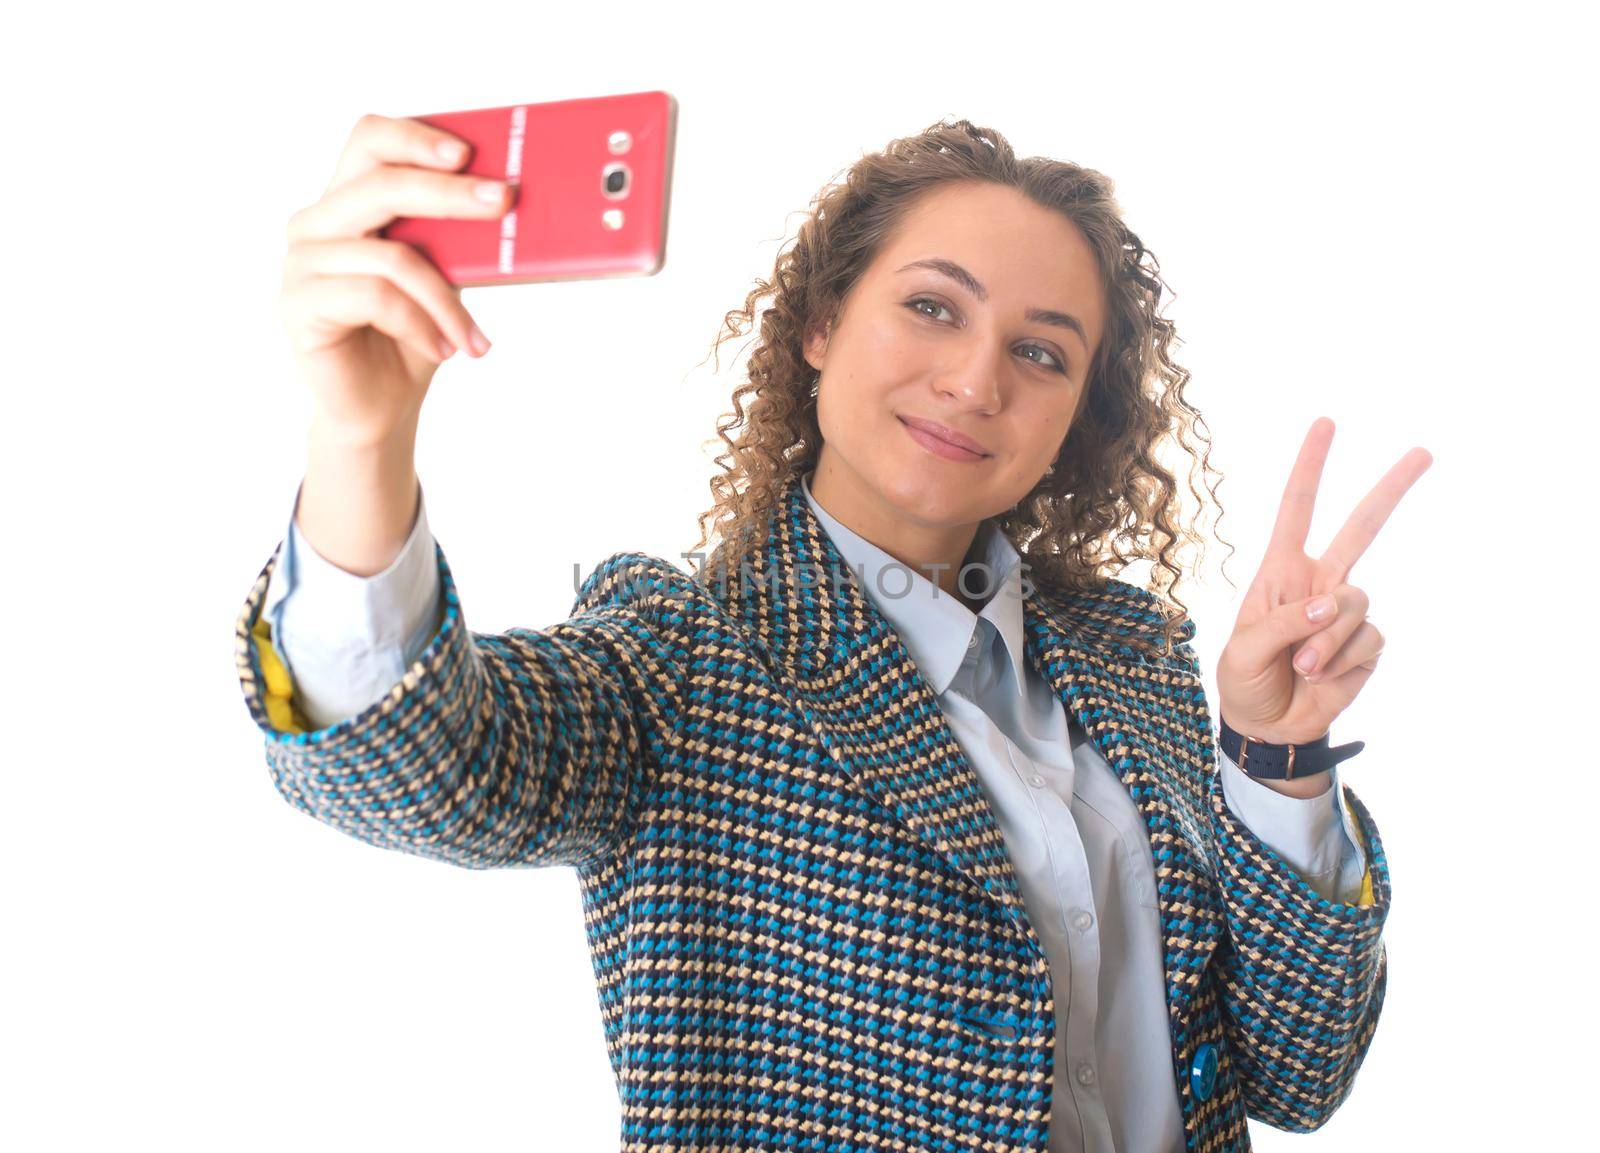 Close up portrait of a cute lovely woman taking selfie and showing peace sign with fingers over white background